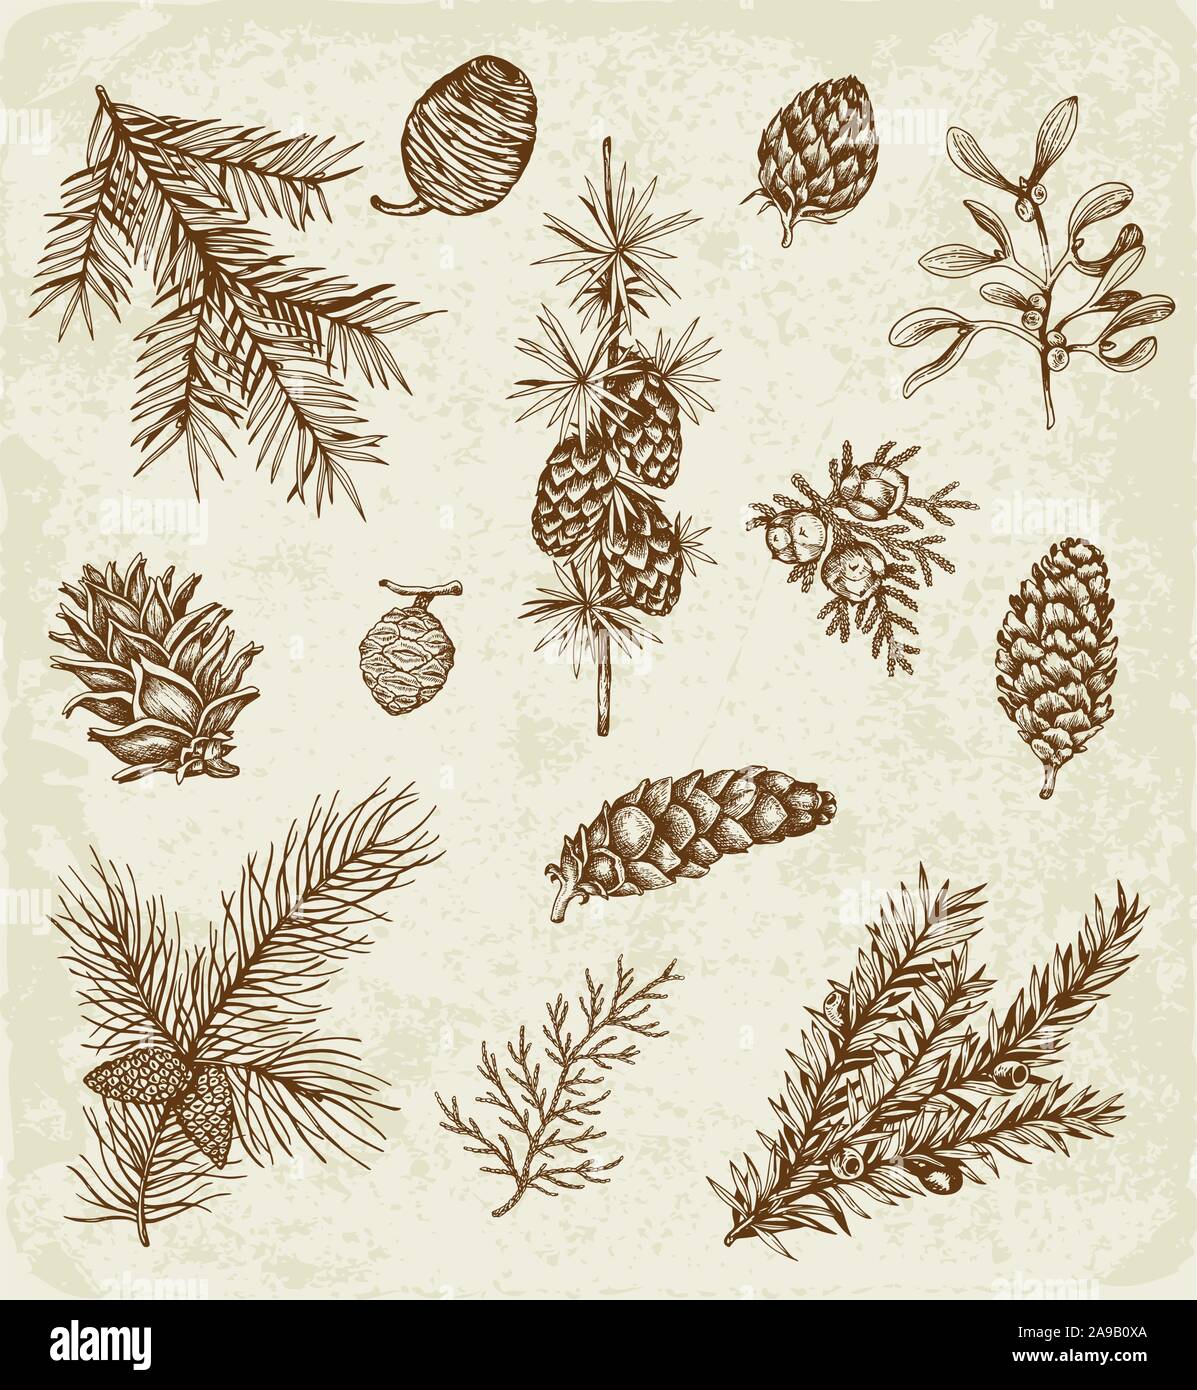 Set of winter evergreen plants and cones. Decorative vintage elements for Christmas and new year design. Hand drawn illustration. Stock Vector